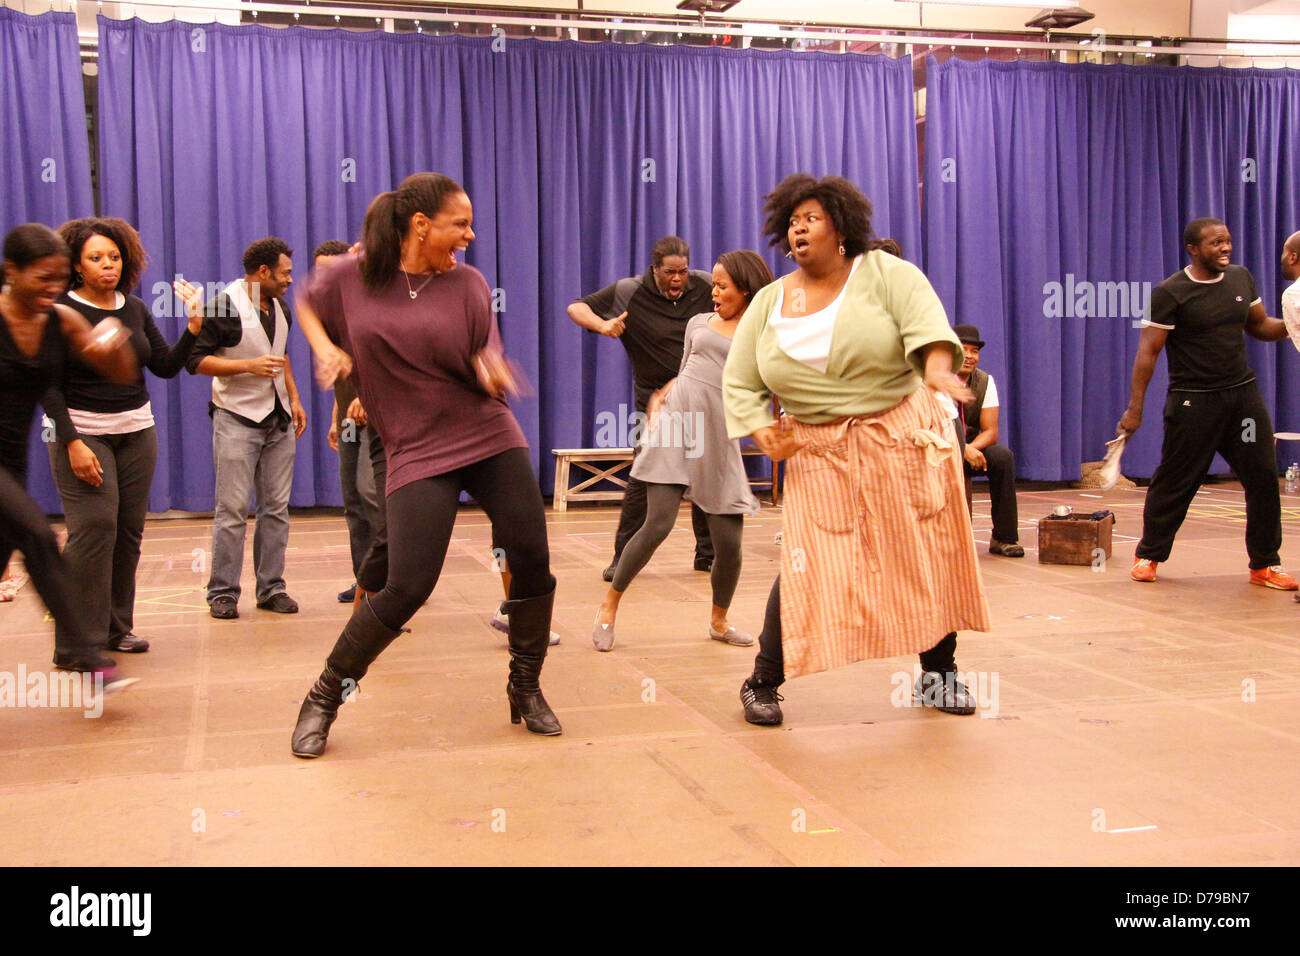 Audra McDonald, NaTasha Yvette Williams and Cast Rehearsal for 'The Gershwins' Porgy and Bess' at the New 42nd Street Studios. Stock Photo